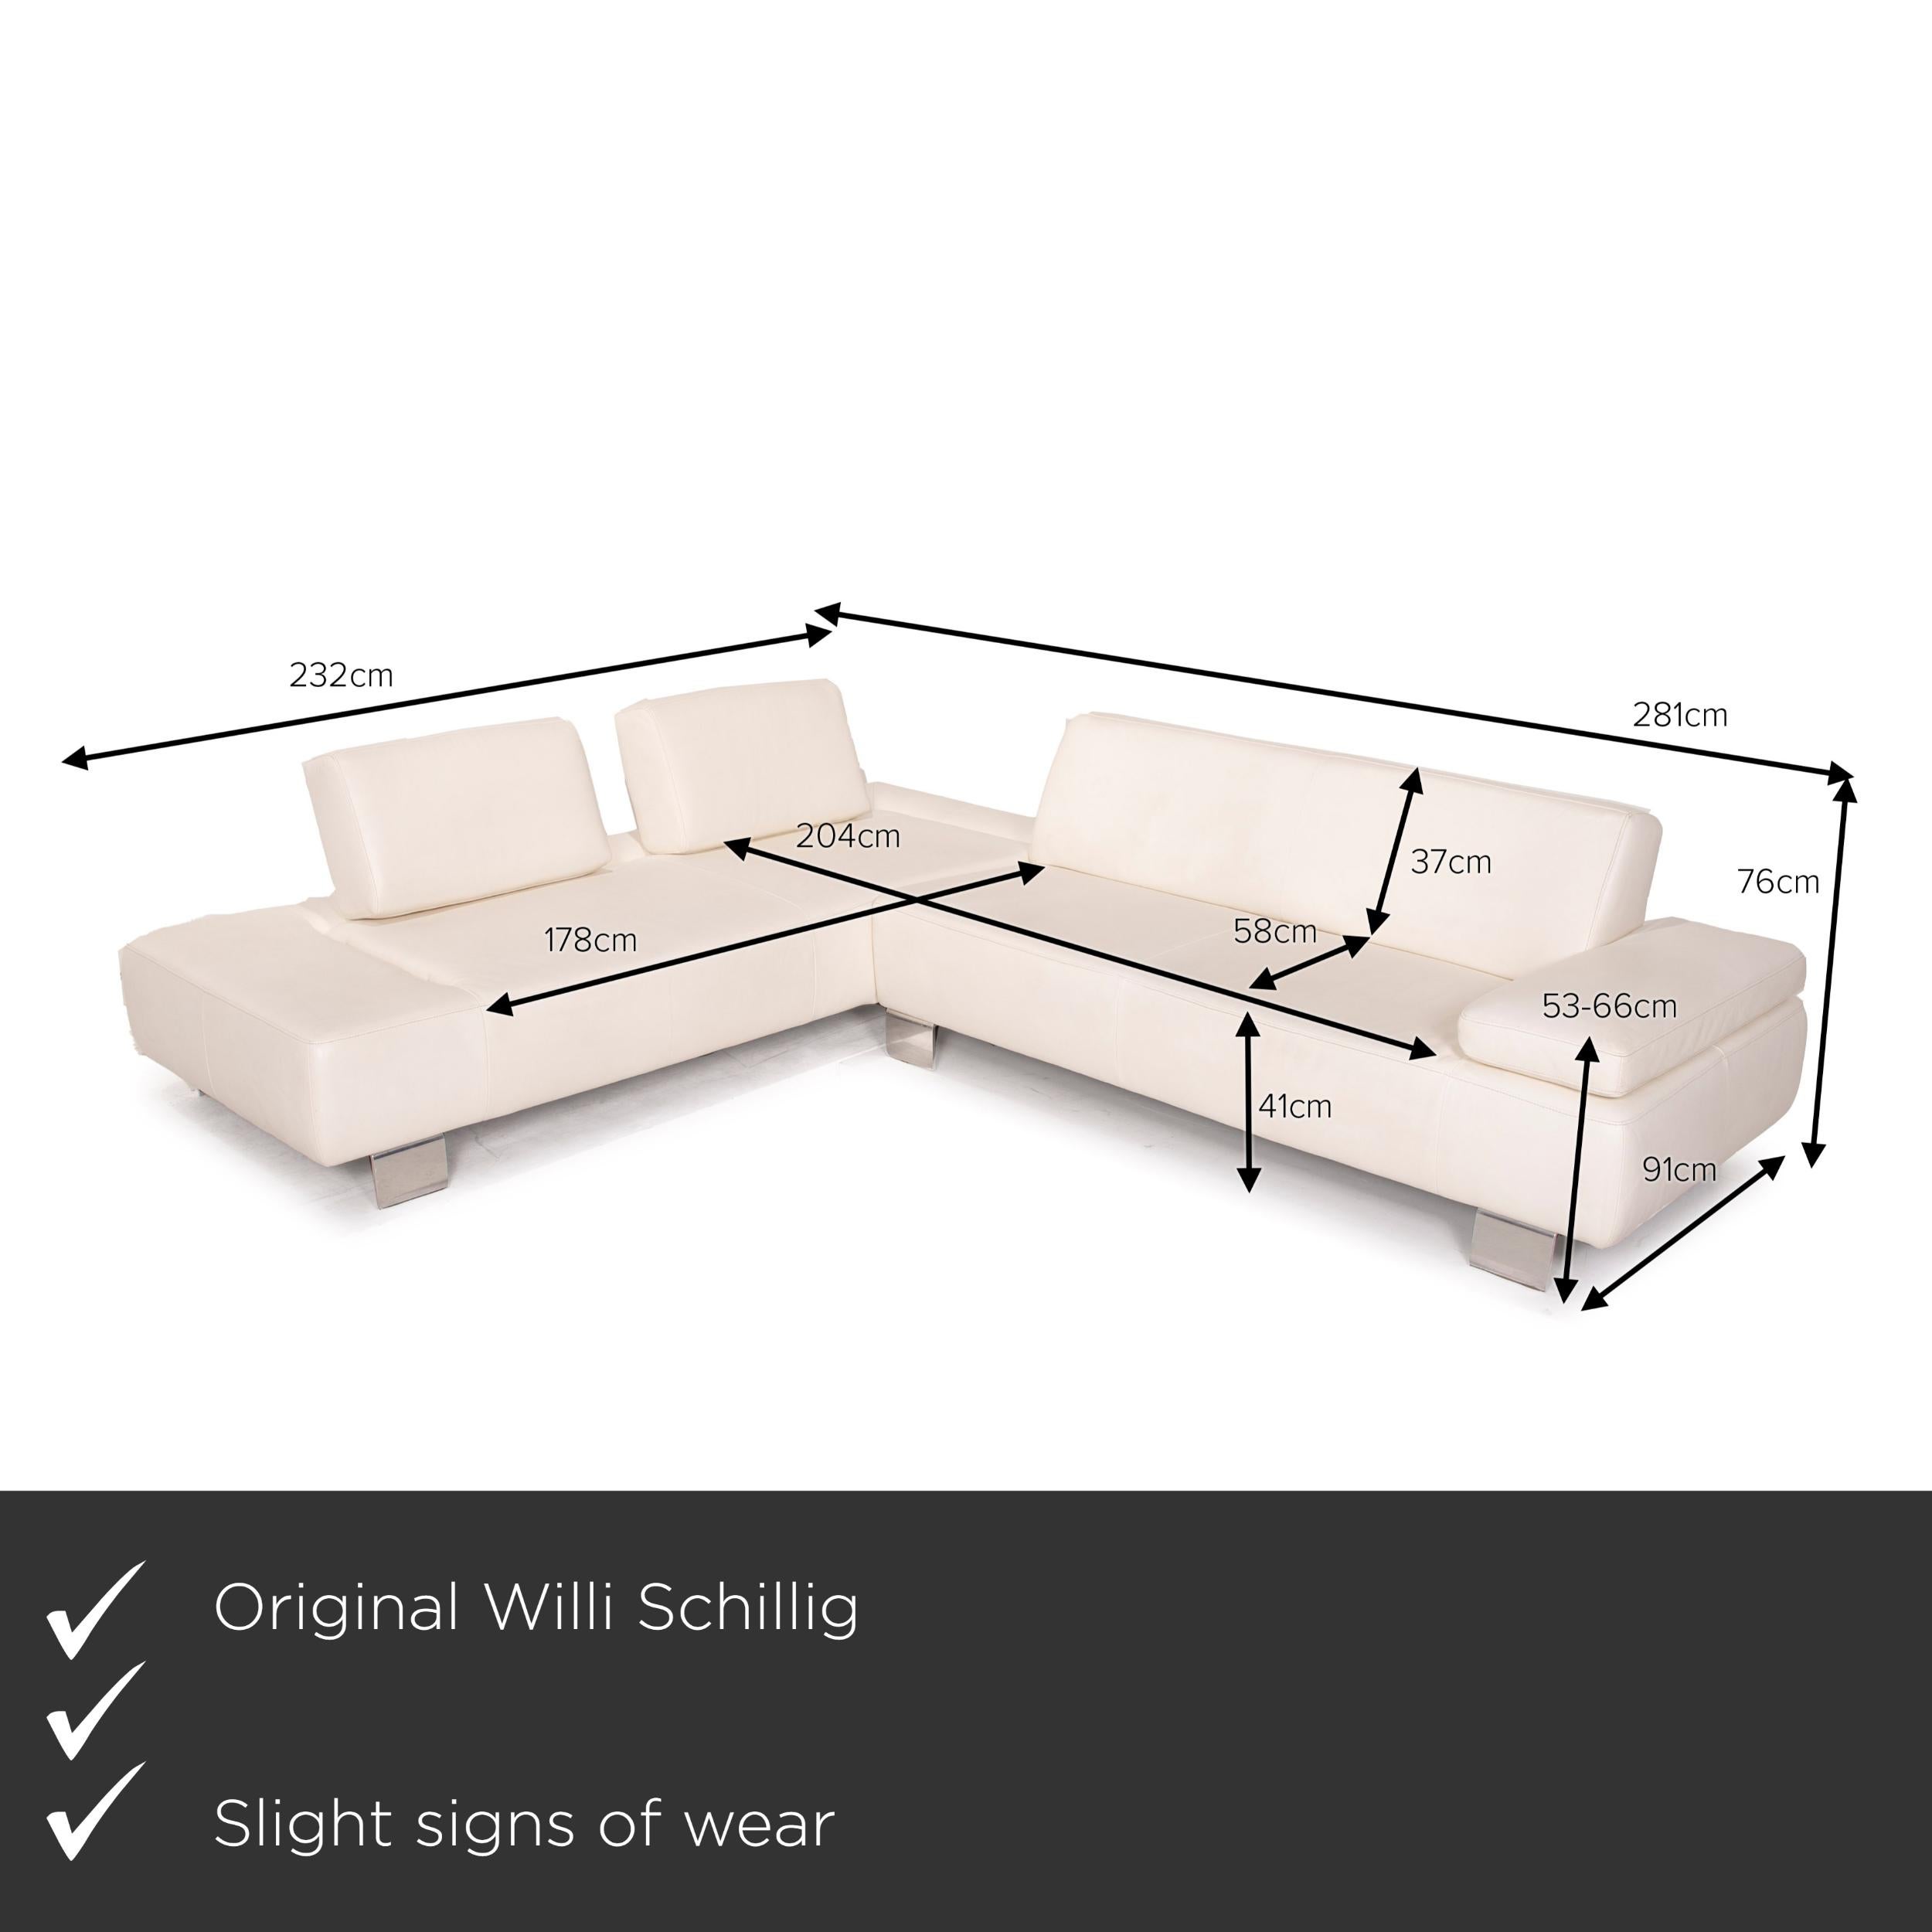 We present to you a Willi Schillig leather sofa cream corner sofa.


 Product measurements in centimeters:
 

Depth: 91
Width: 232
Height: 76
Seat height: 41
Rest height: 53
Seat depth: 58
Seat width: 178
Back height: 37.
 